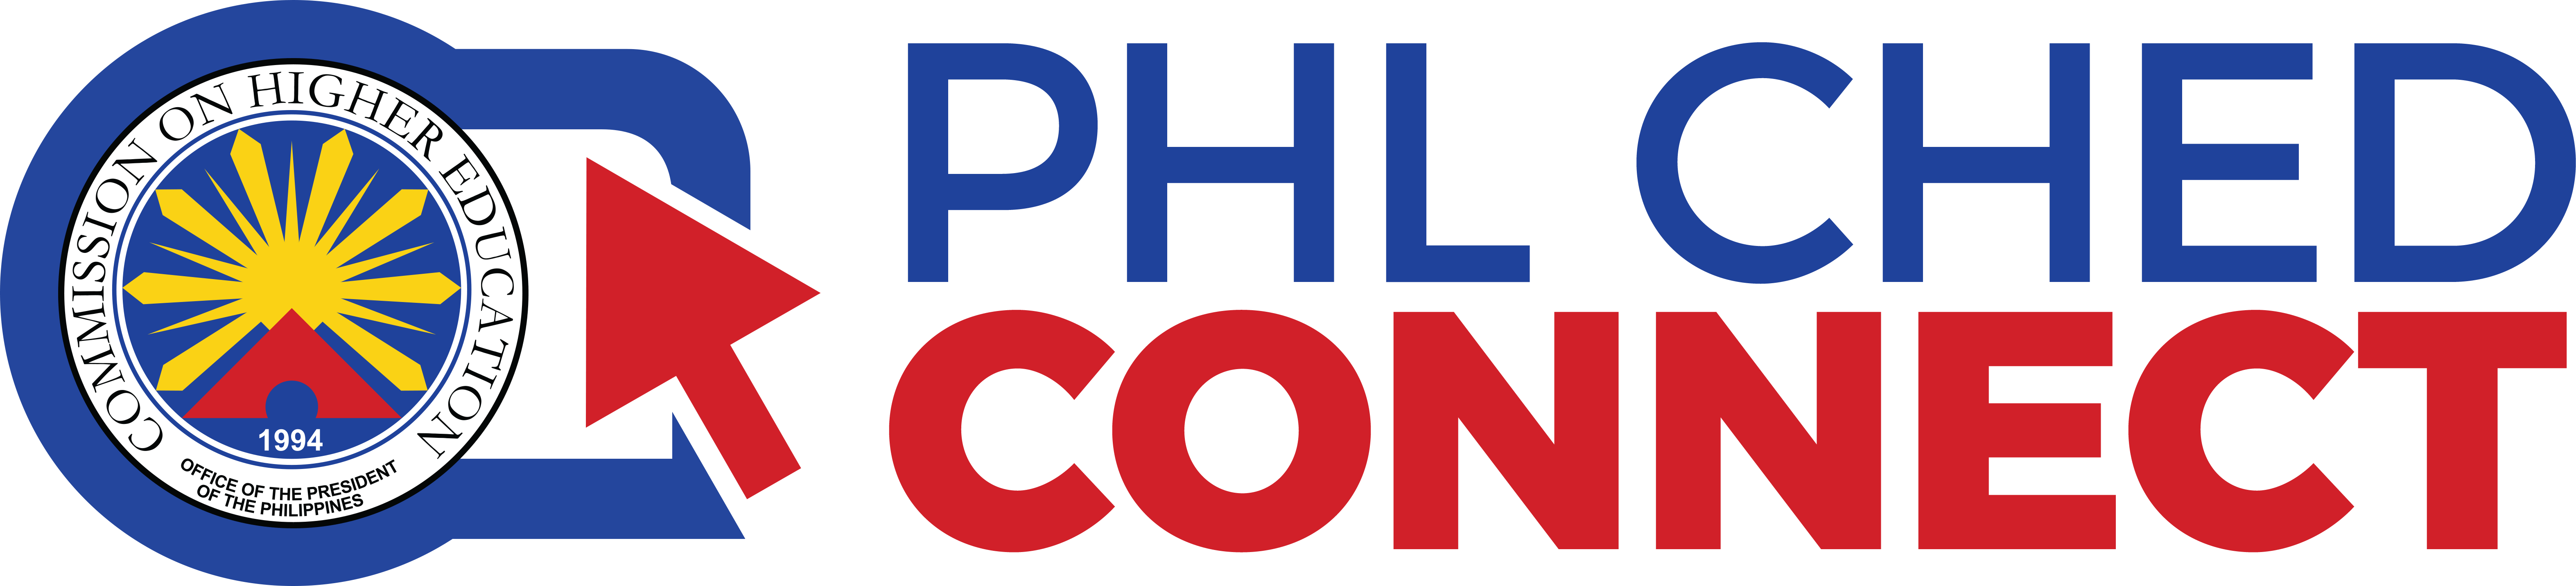 PHL CHED Connect